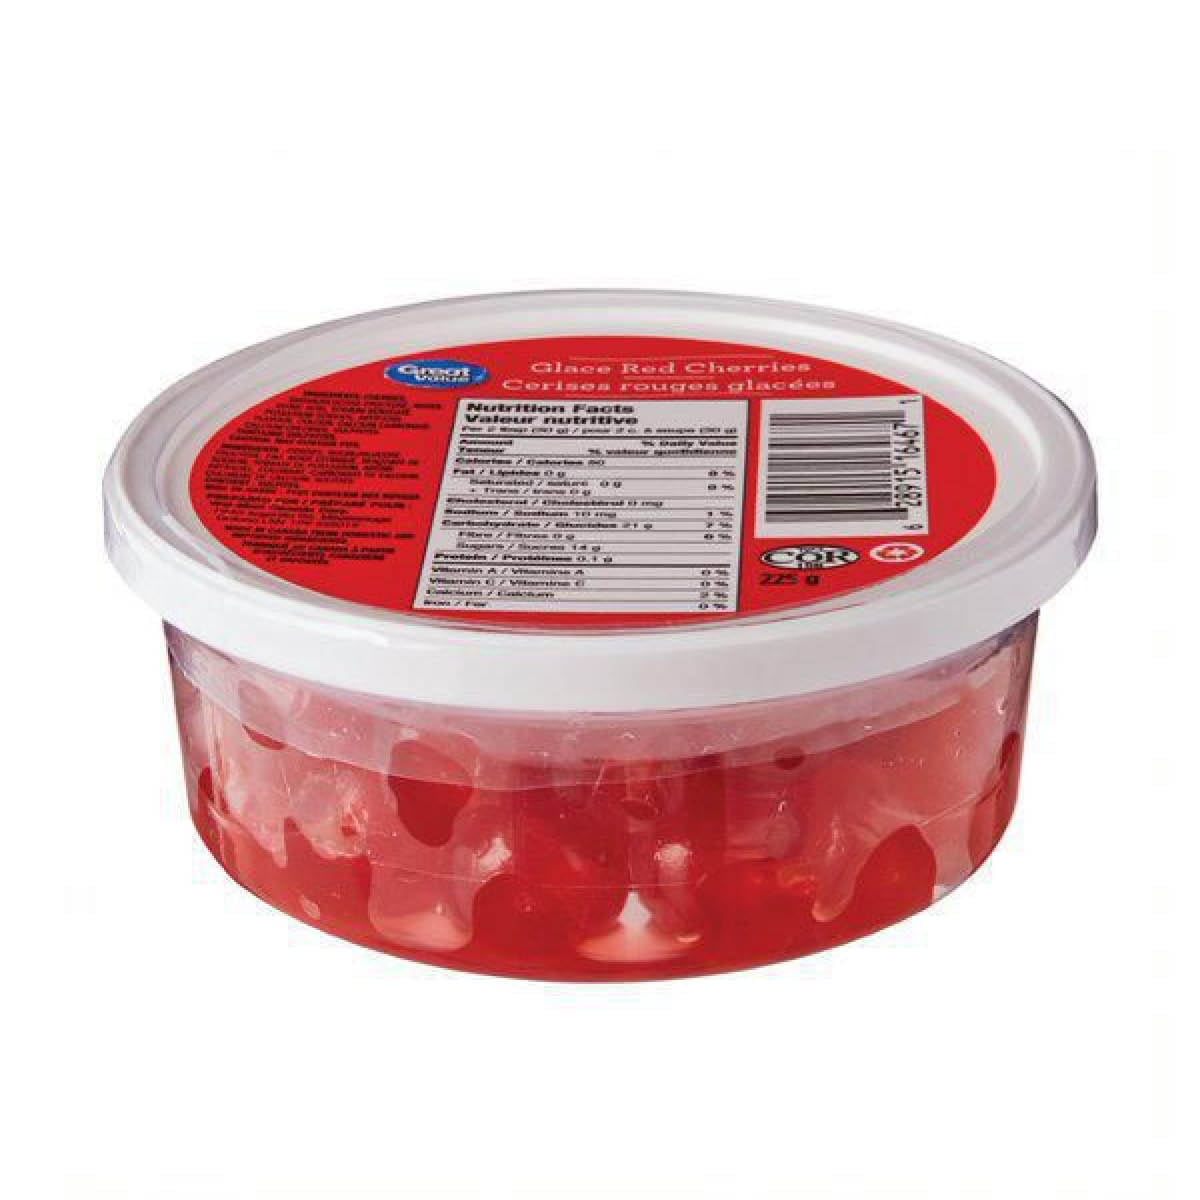 Daltons Red Glace Cherries, 225G